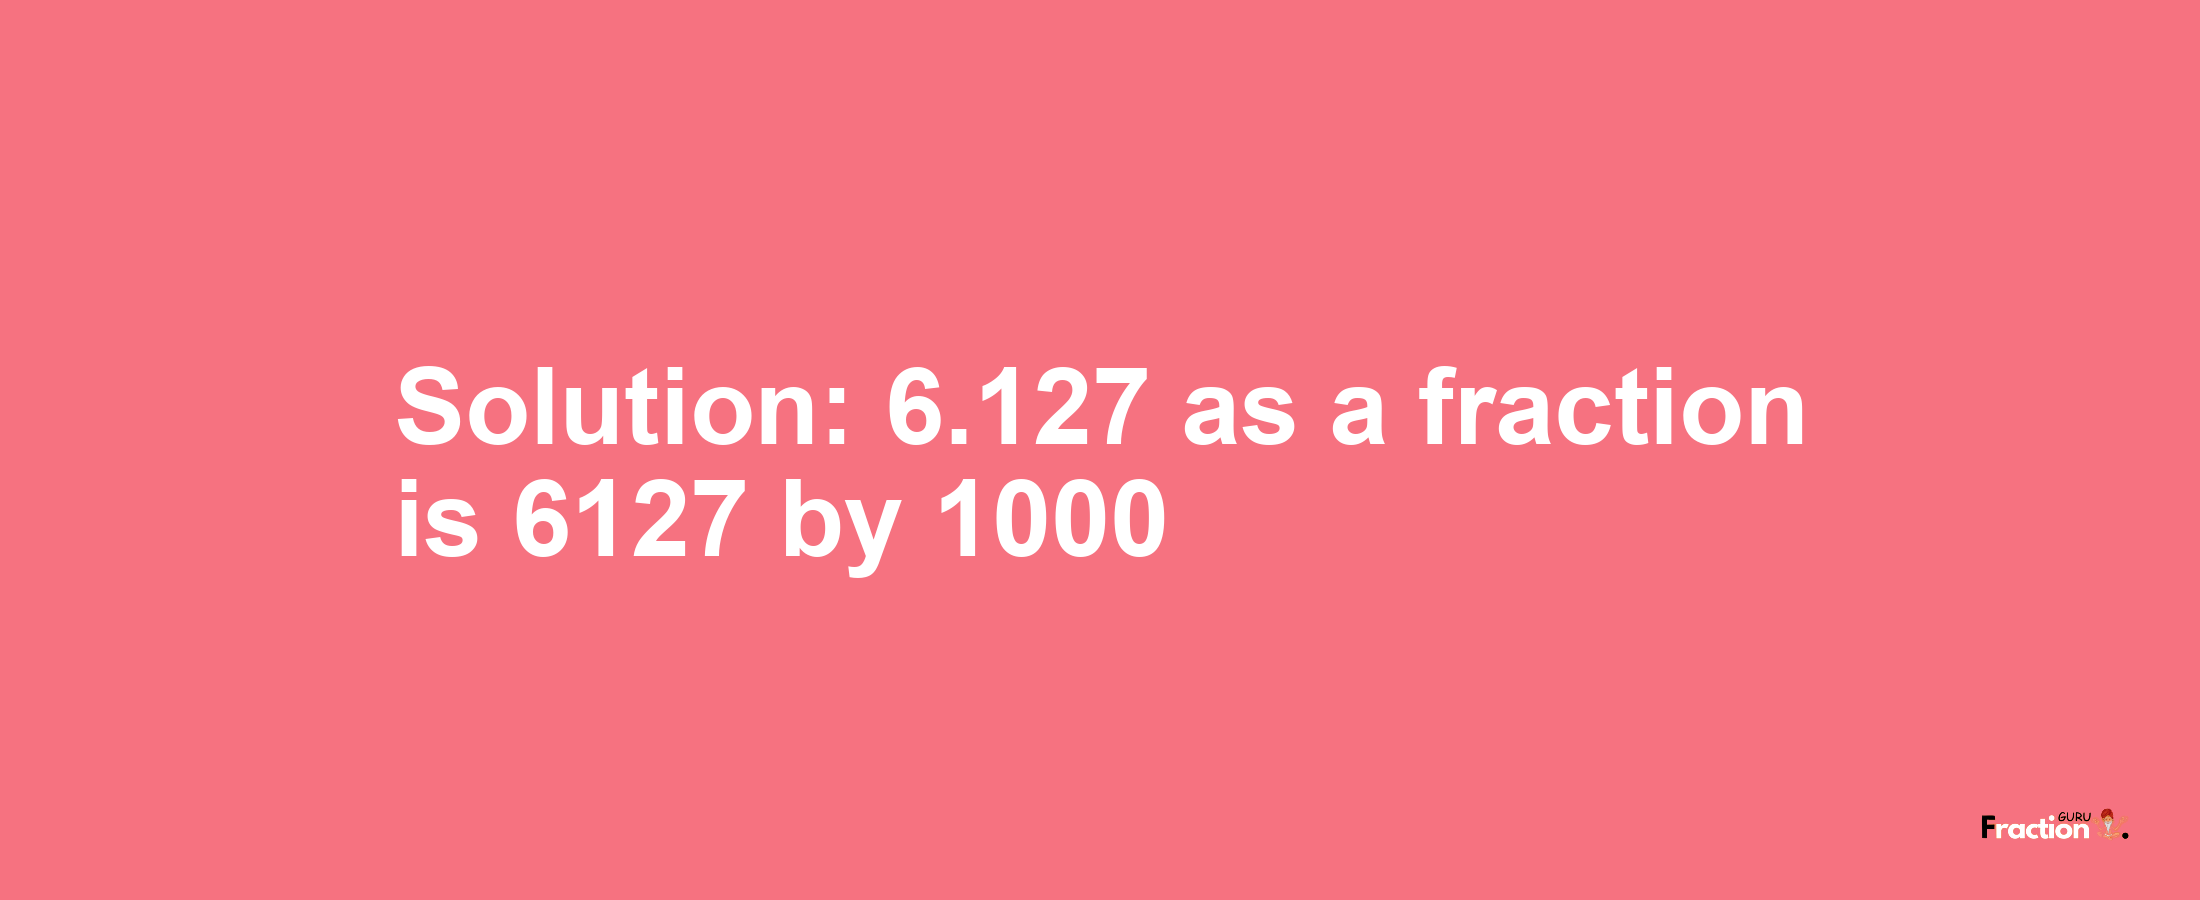 Solution:6.127 as a fraction is 6127/1000